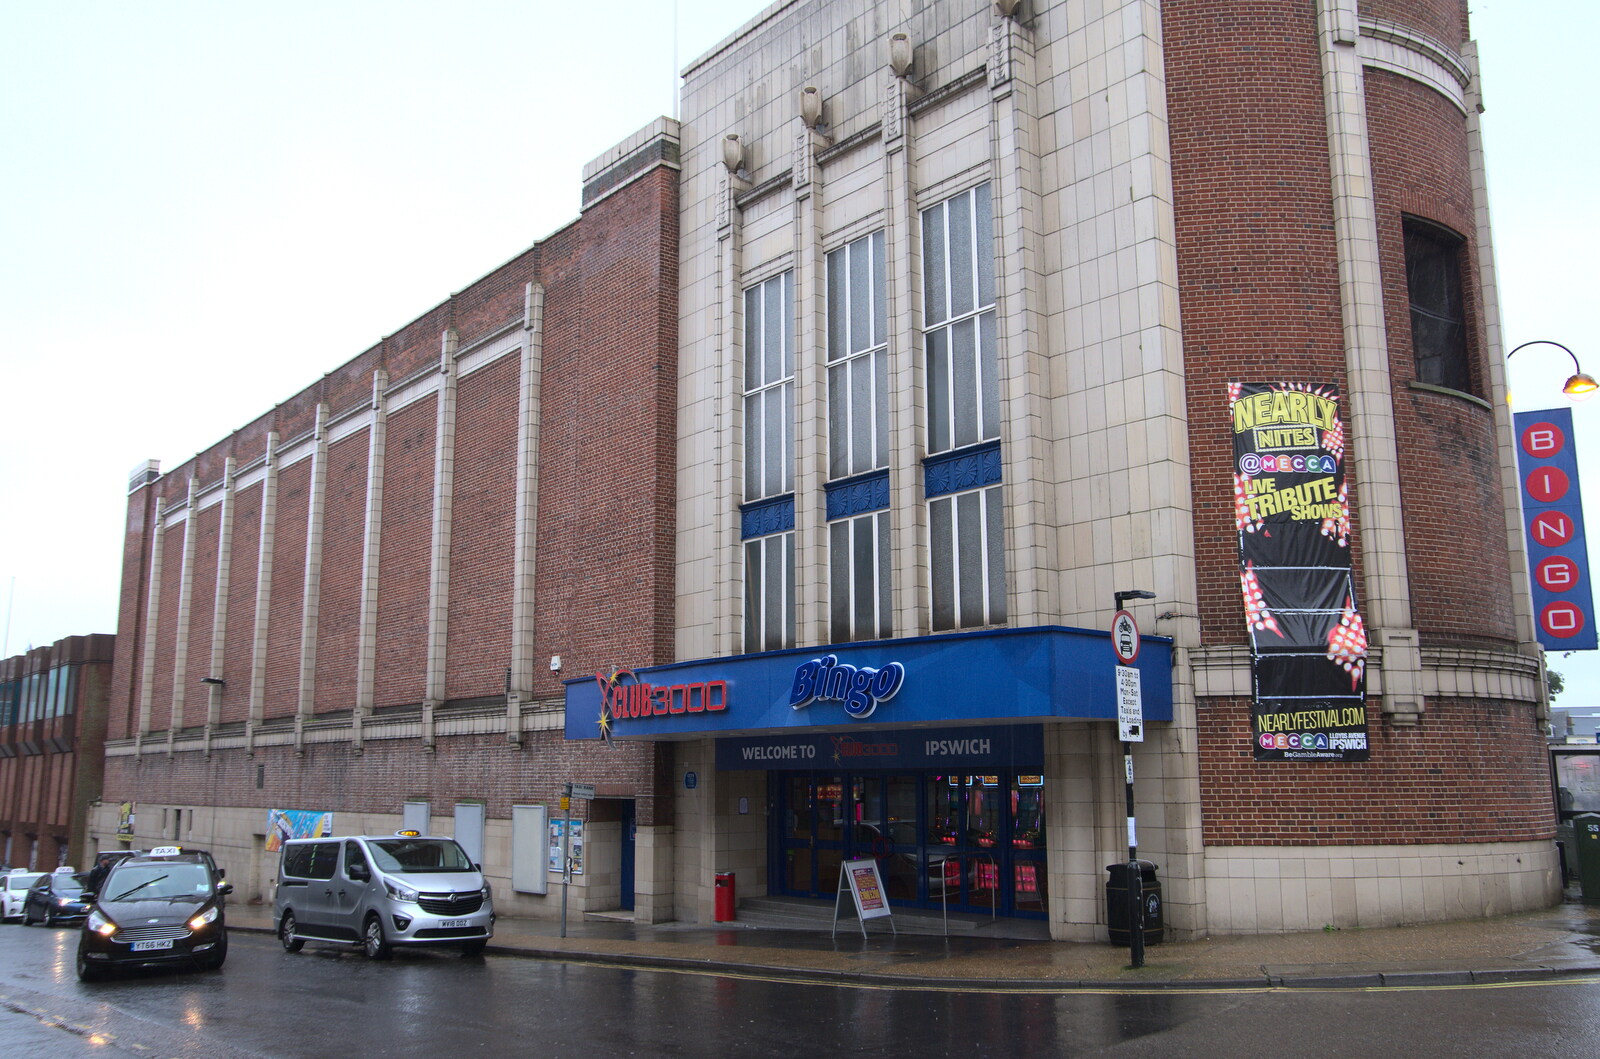 Ipswich Odeon, built in the 1930s from Fred's Flute Exam, Ipswich, Suffolk - 5th March 2020